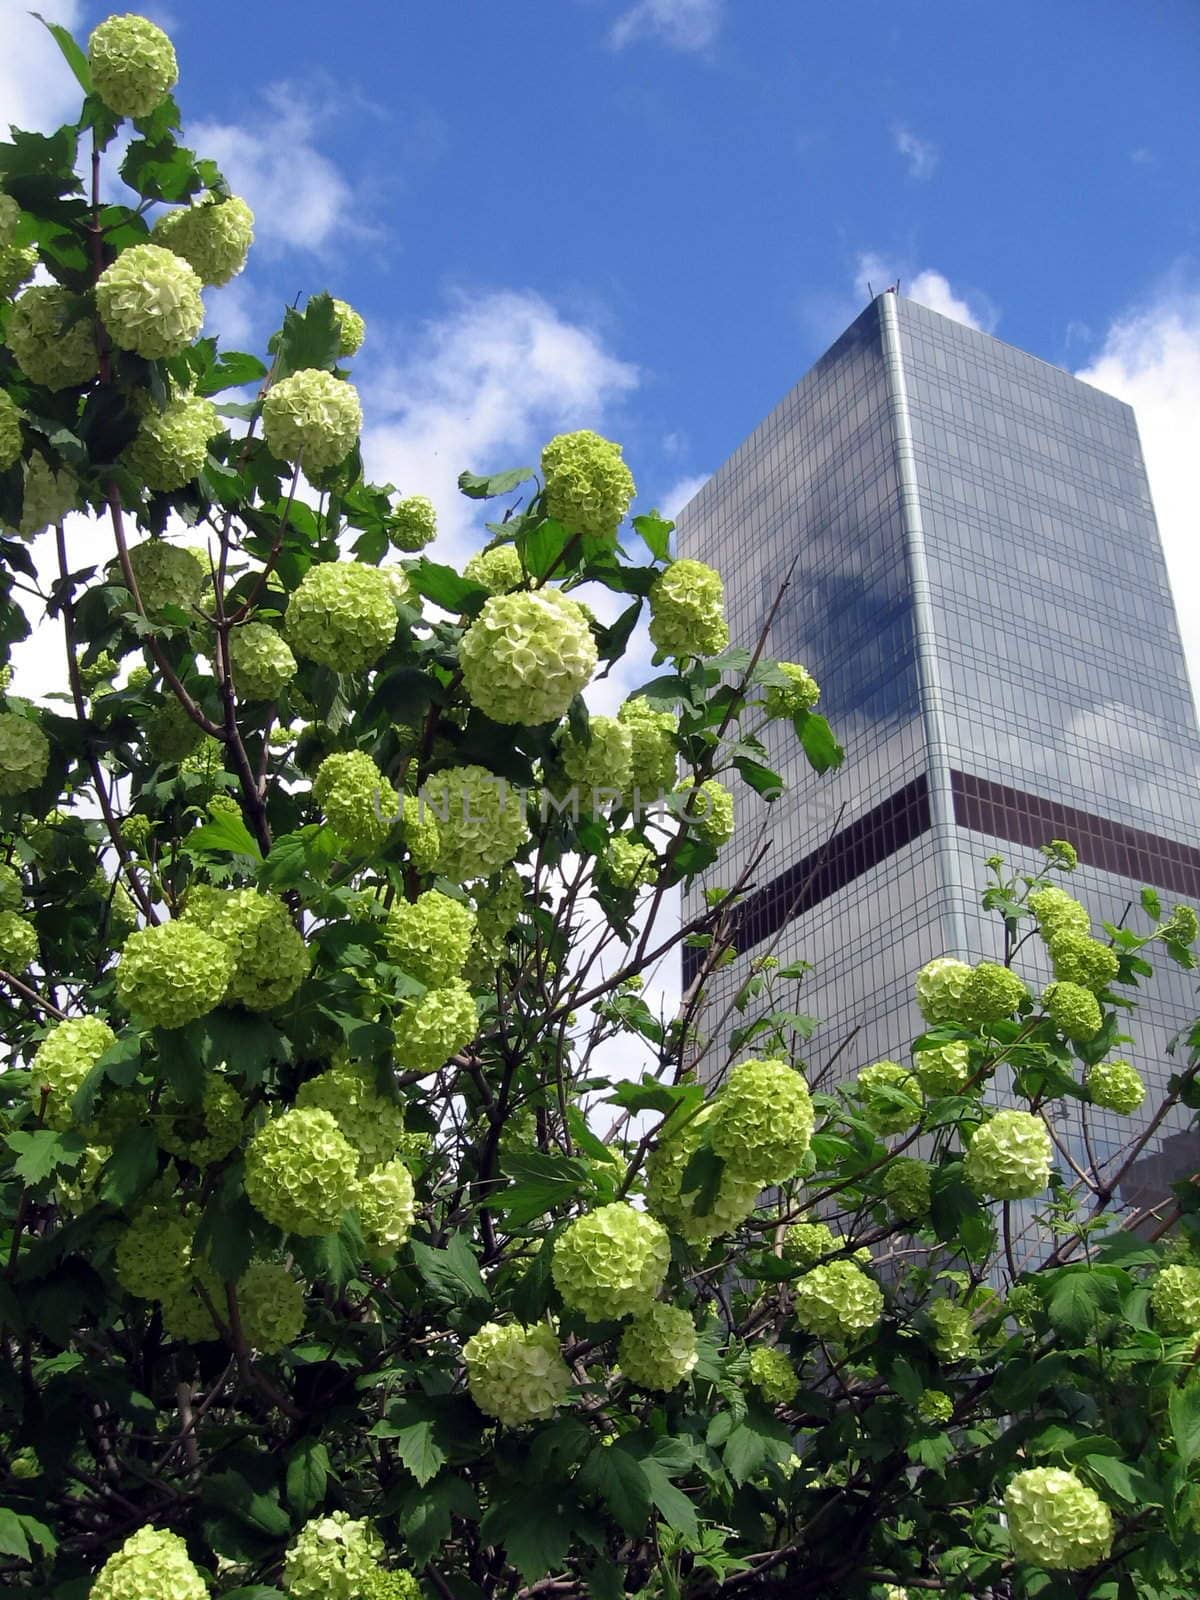 Blossoming bush on a background of building